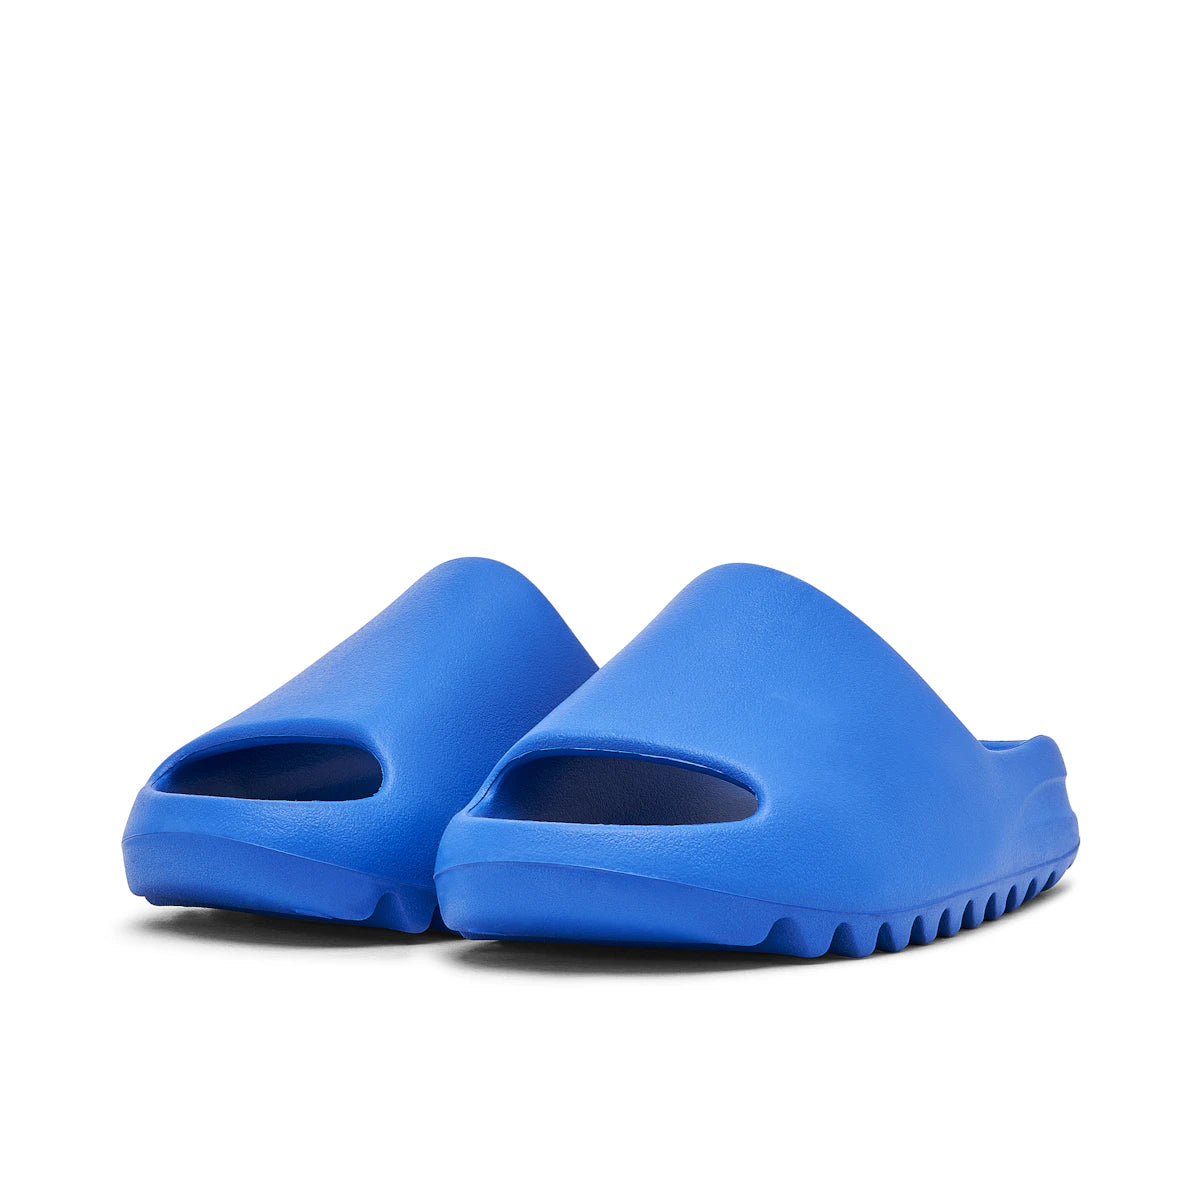 adidas Yeezy Slide Azure by Yeezy from £129.00